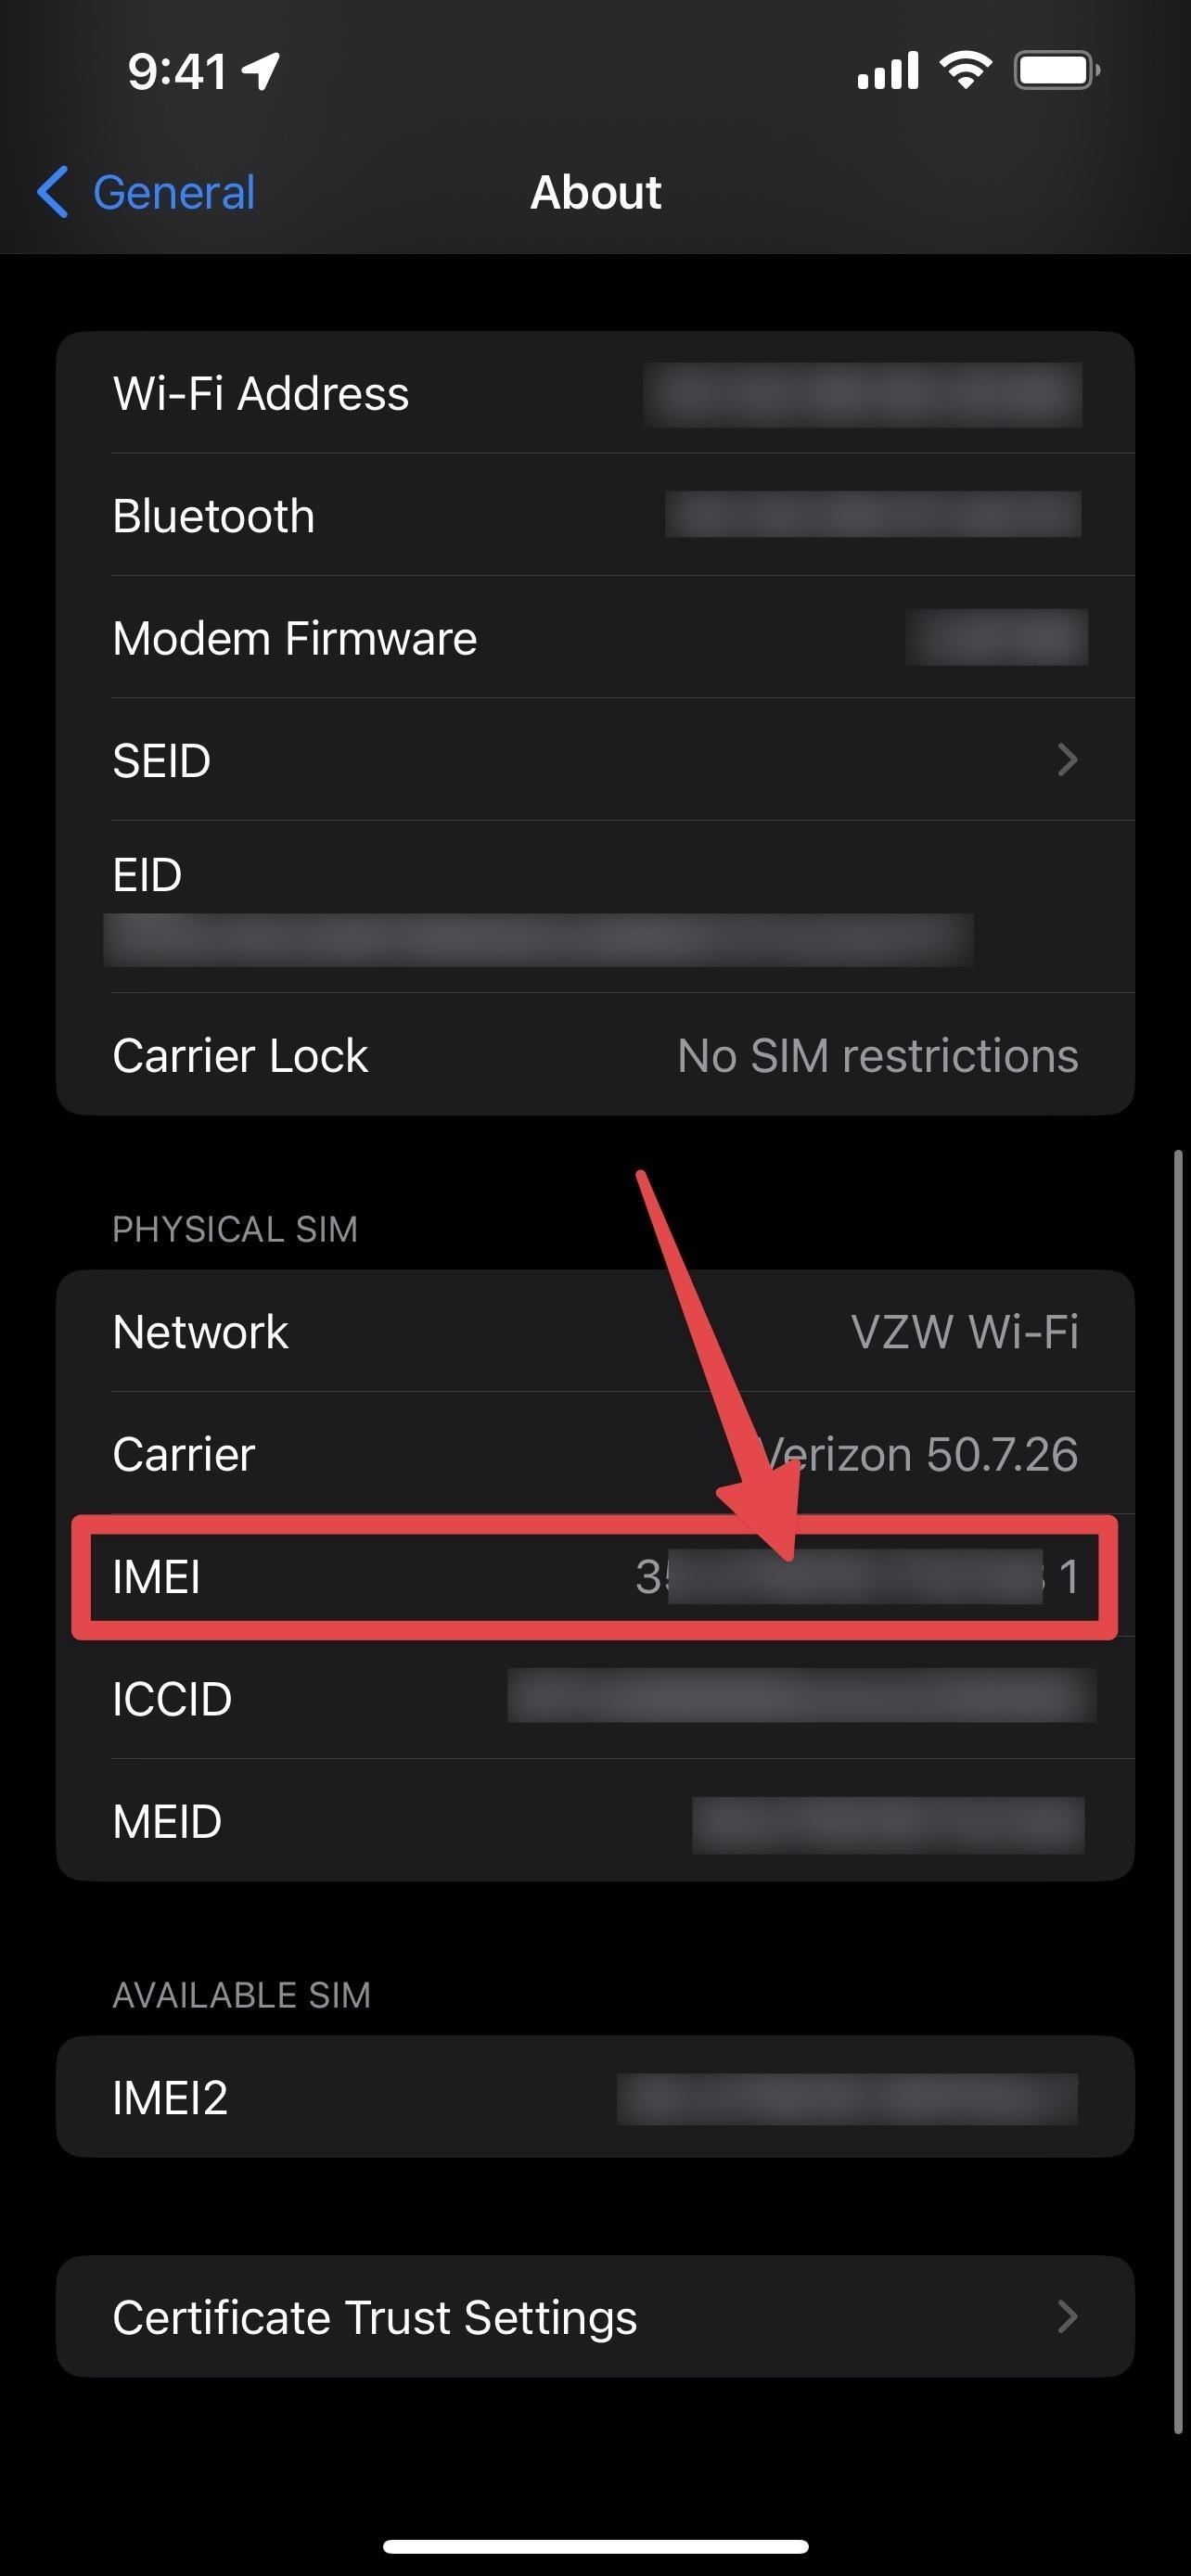 Can You Bring Your Phone to a New Carrier? This Is How You Tell